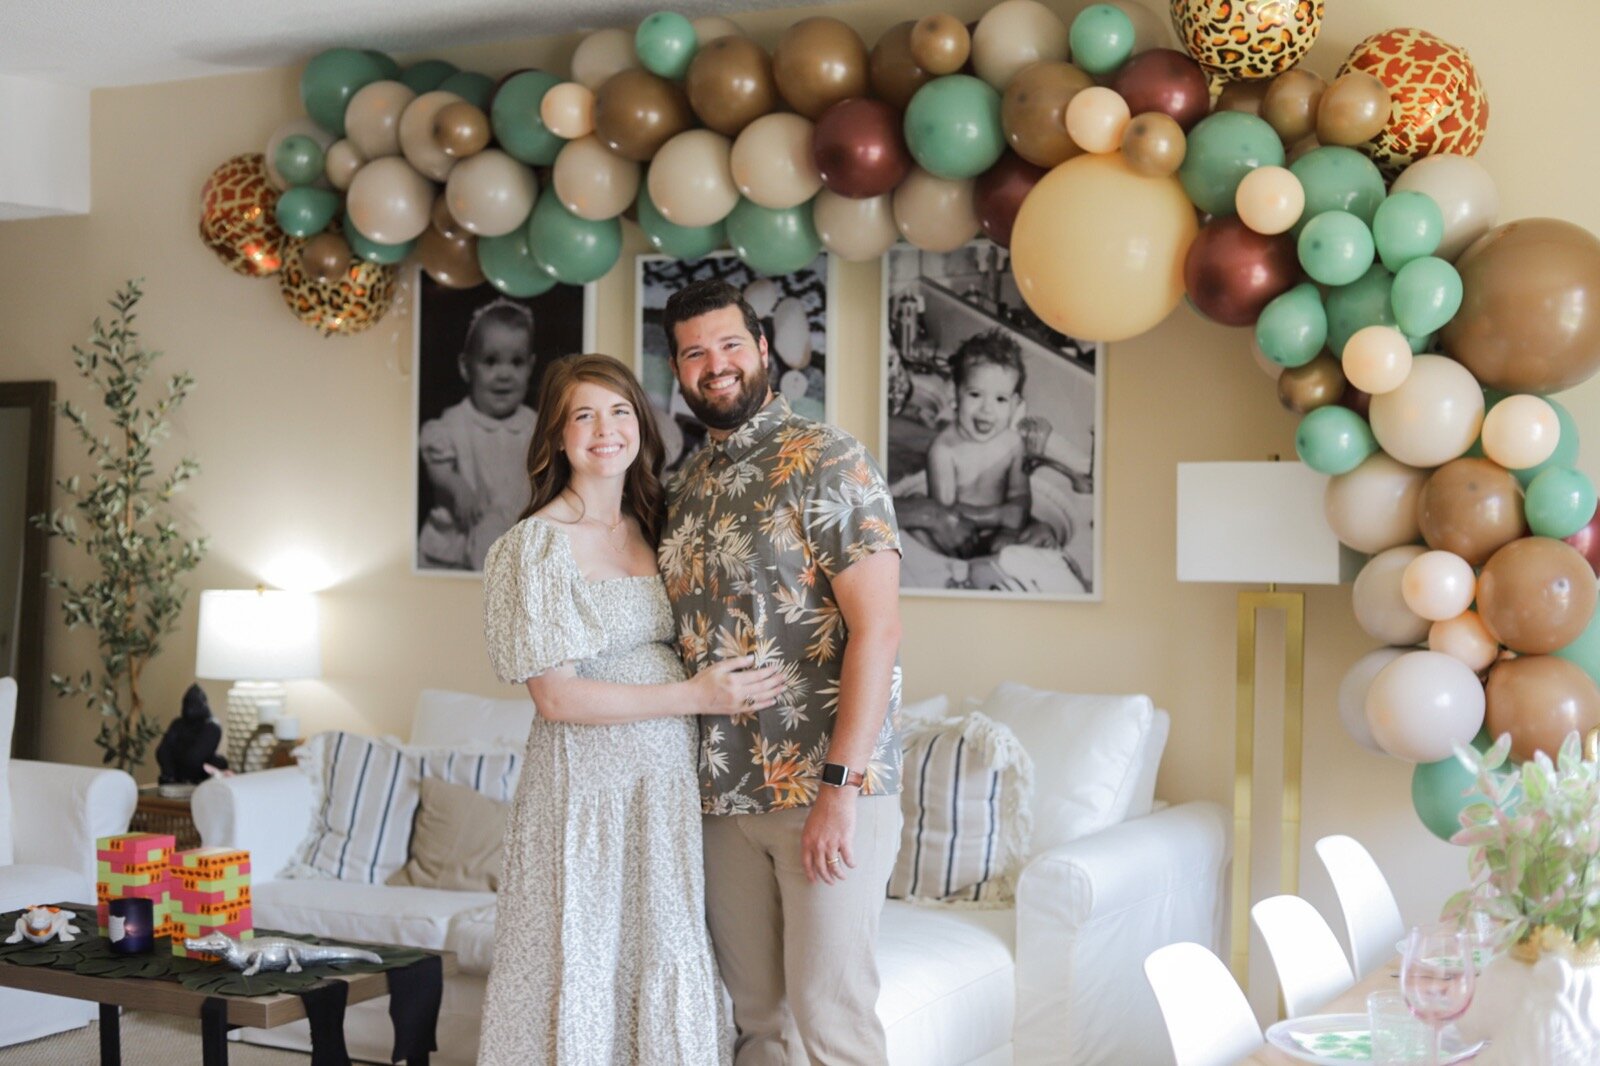 "Land Before Twins" Jungle Baby Shower Theme, twin baby shower theme, baby shower inspo, safari, wildlife, baby shower ideas, personal details, lments of style, la blogger, nothing fits but kiko dress in ichika print